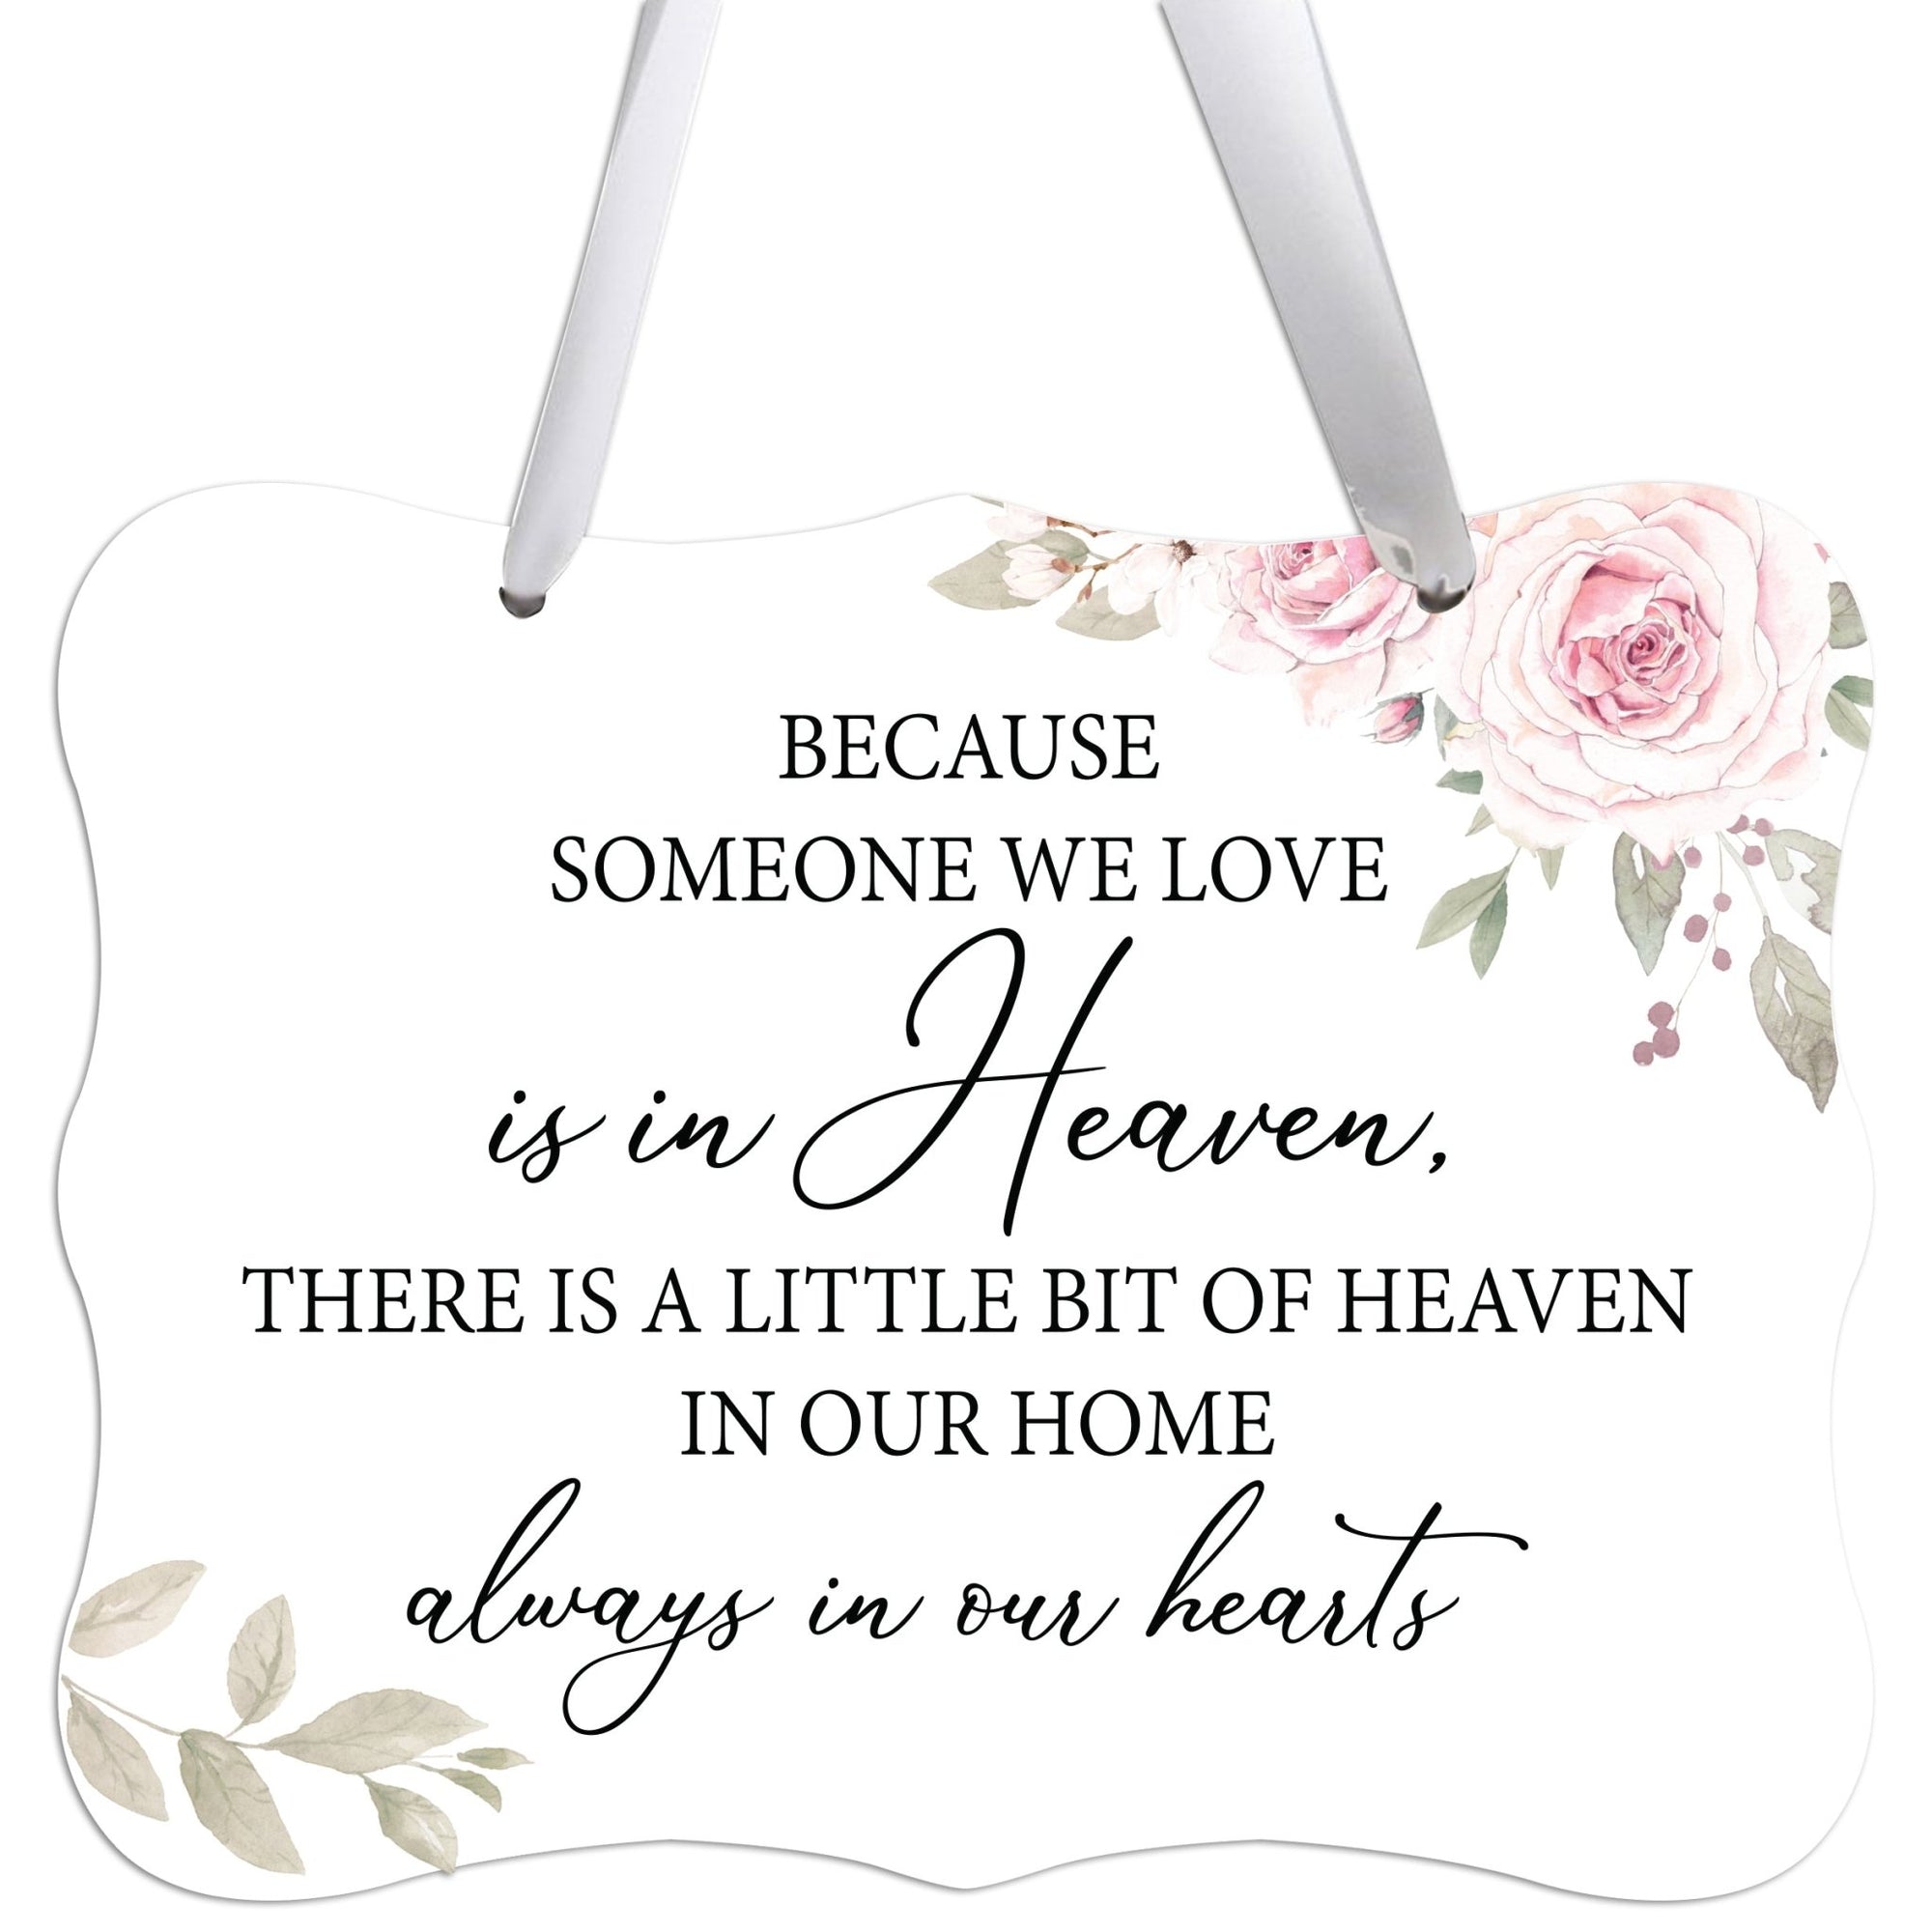 Memorial Hanging Ribbon Wall Decor for Loss of Loved One - Because Someone We Love - LifeSong Milestones